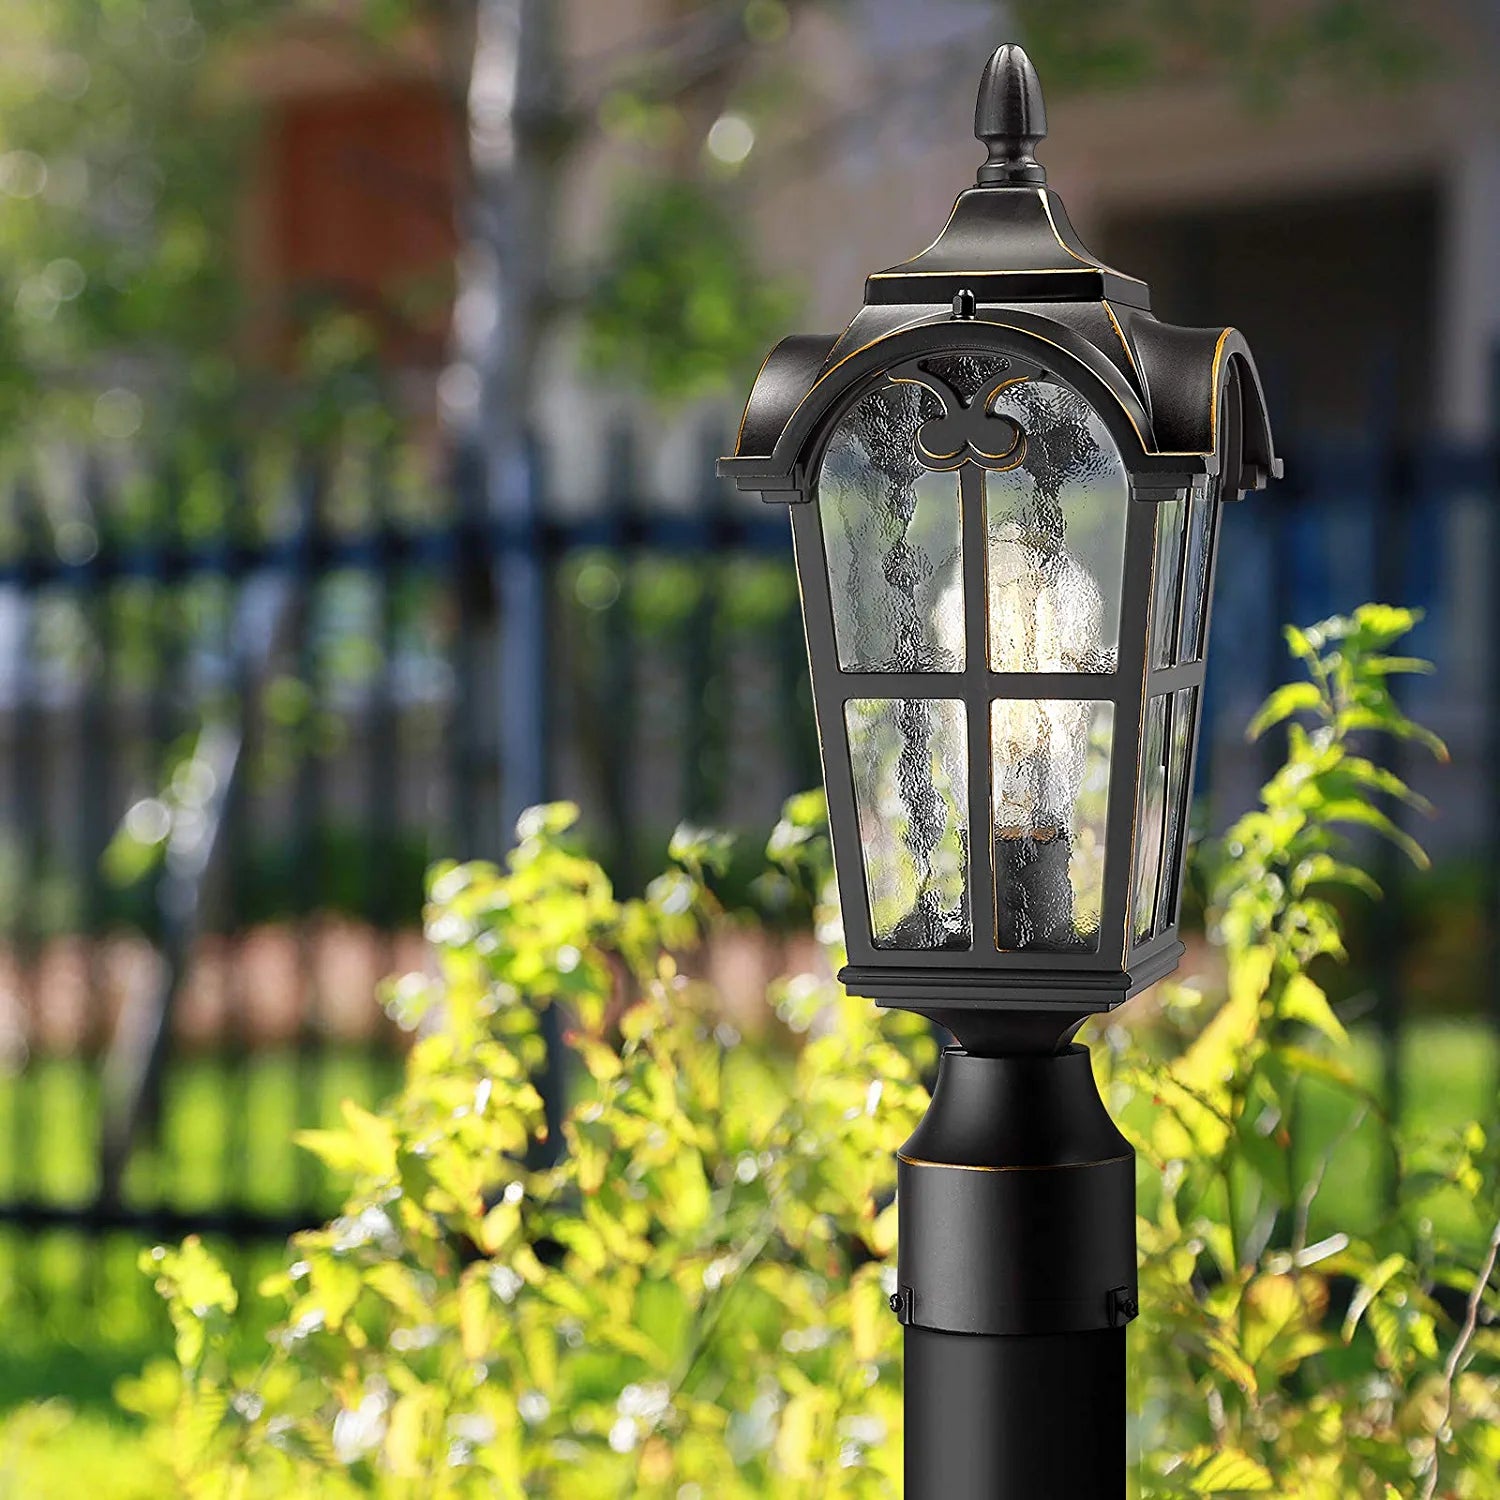 Installing an Outdoor Post Light: A Detailed Guide